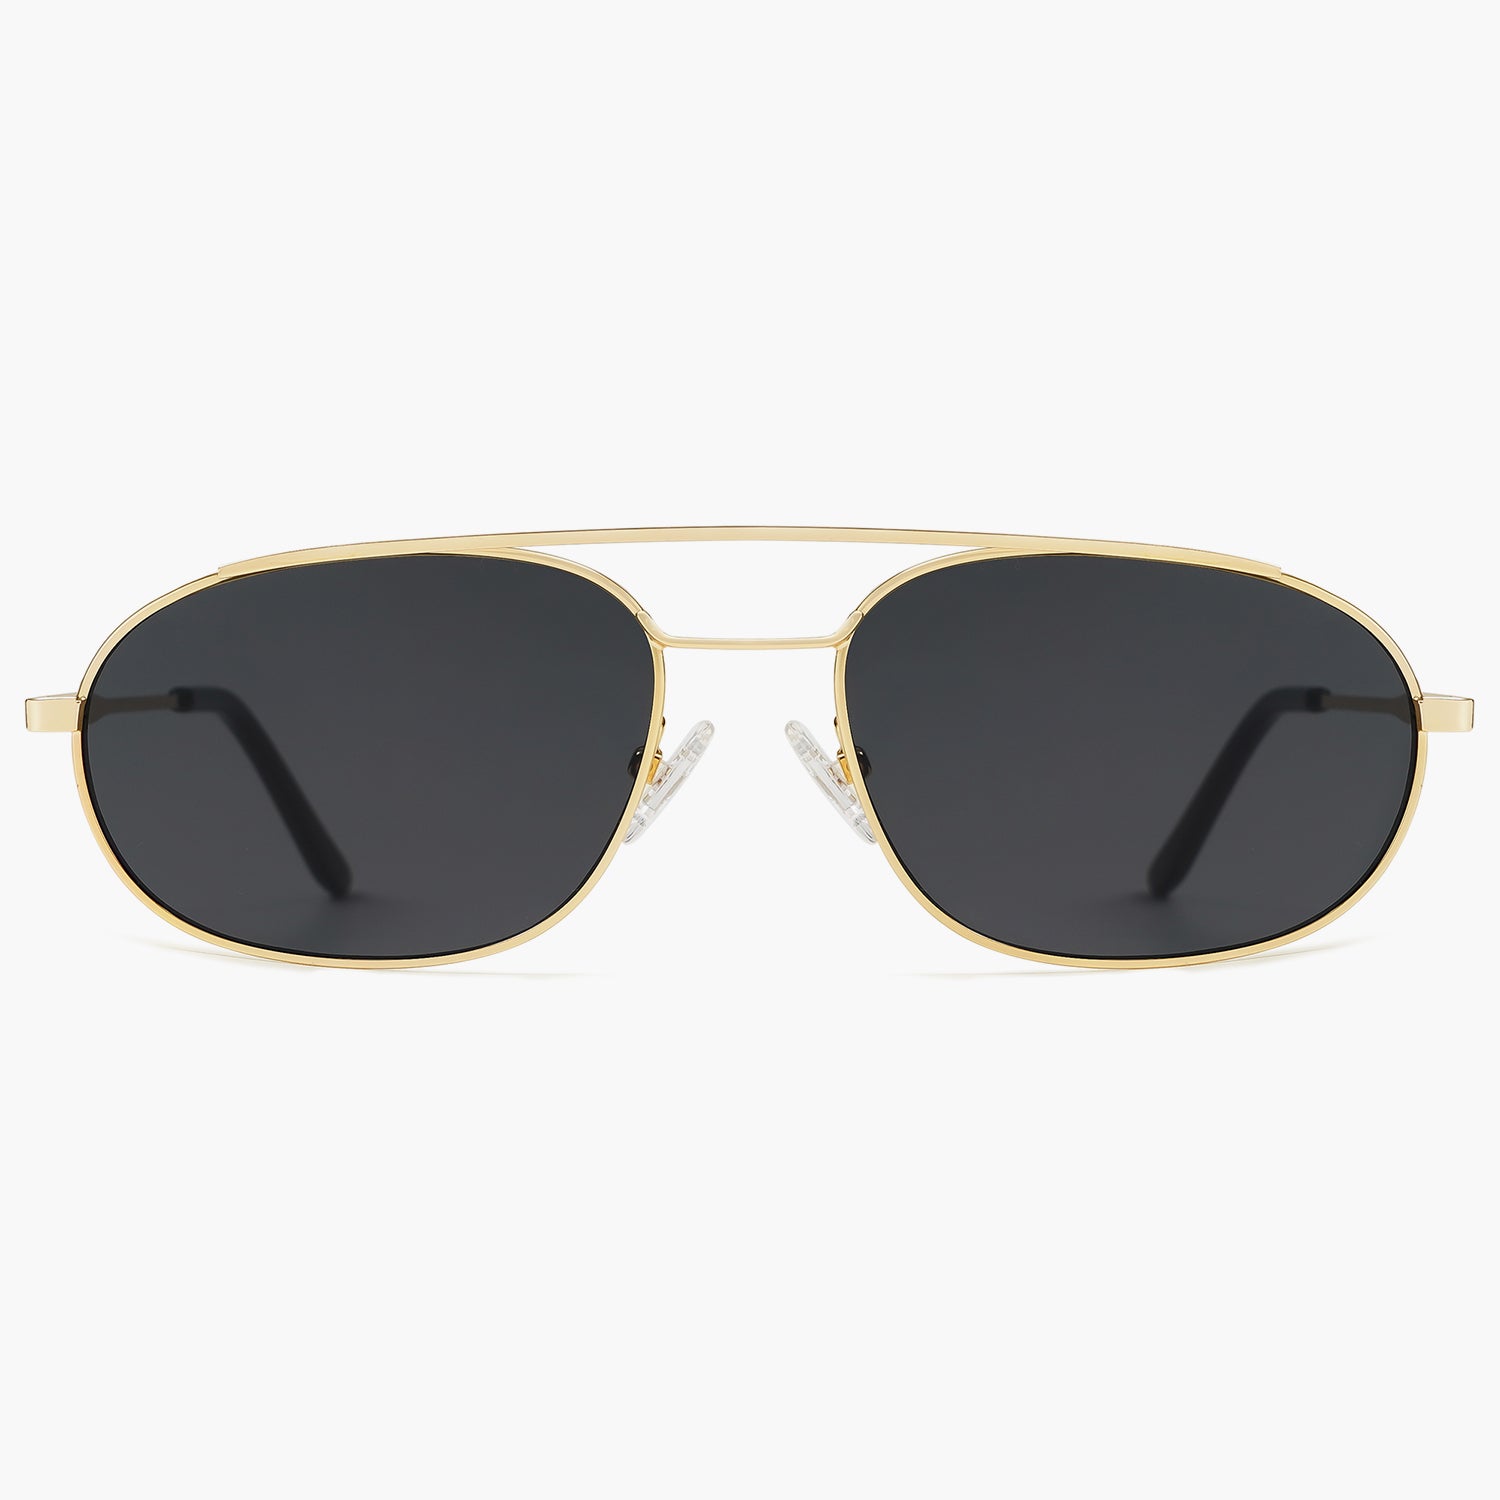 Vintage Aviator Sunglasses Make You Stand Out the Whole Summer – SOJOS